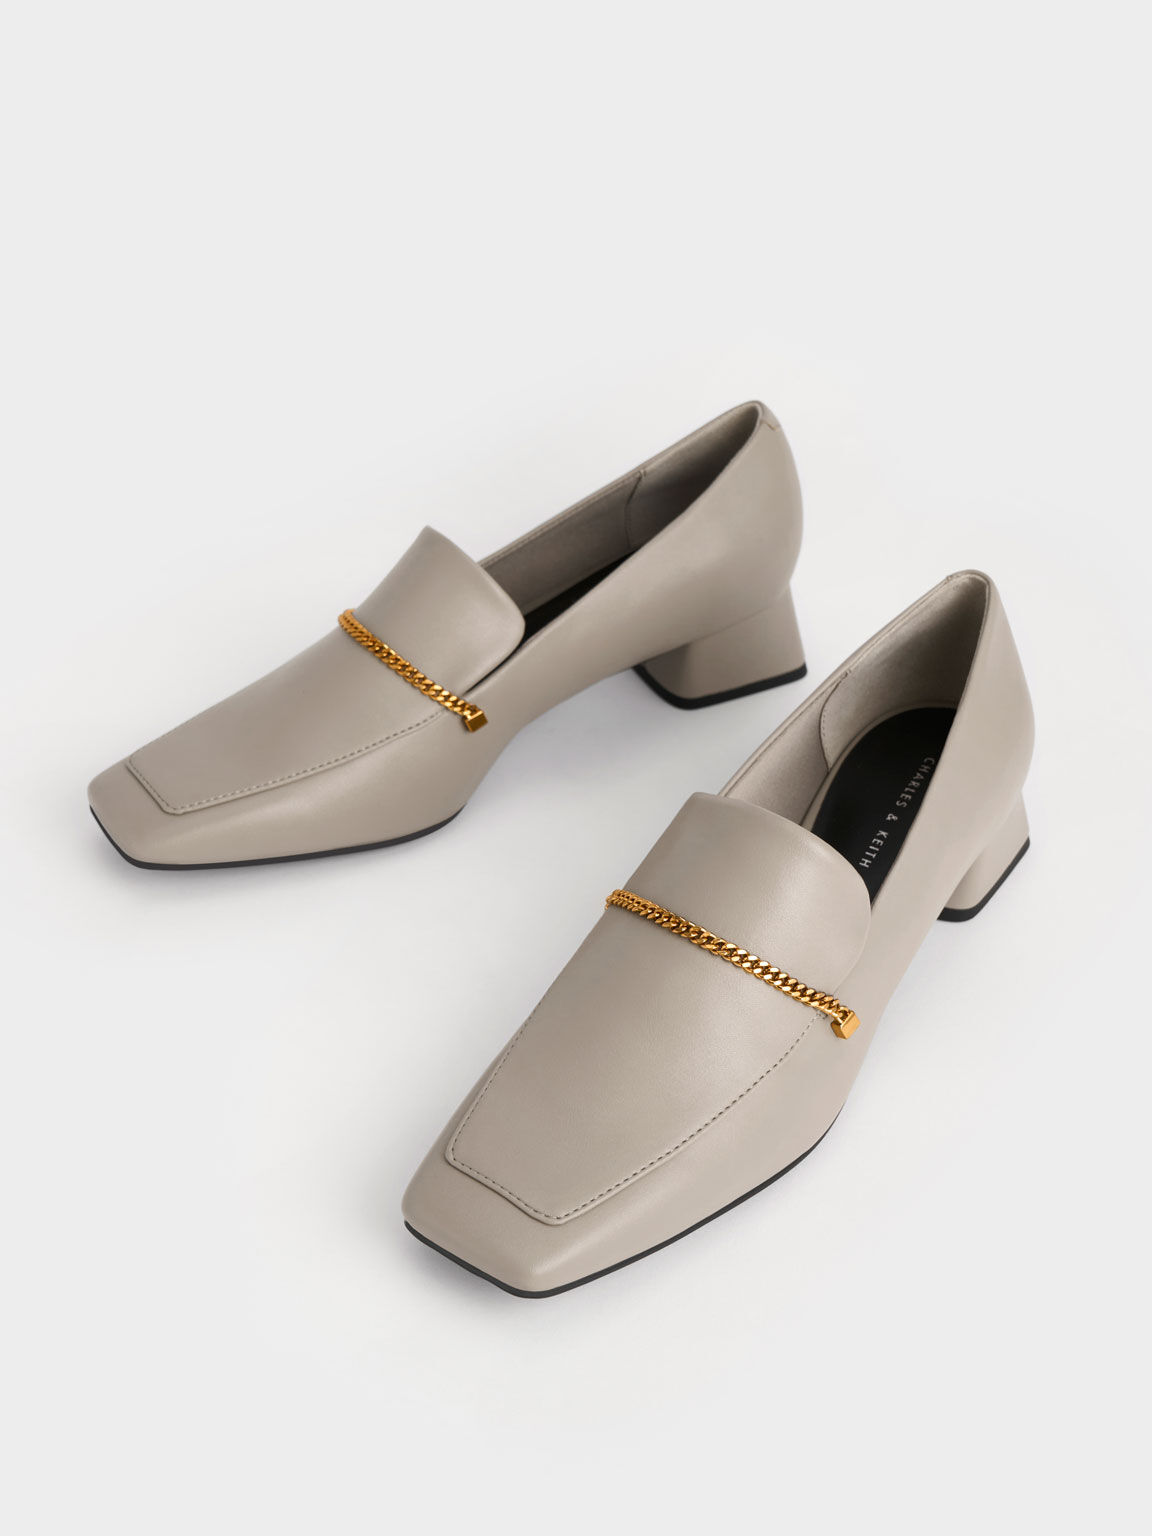 Chain-Link Loafers, Taupe, hi-res